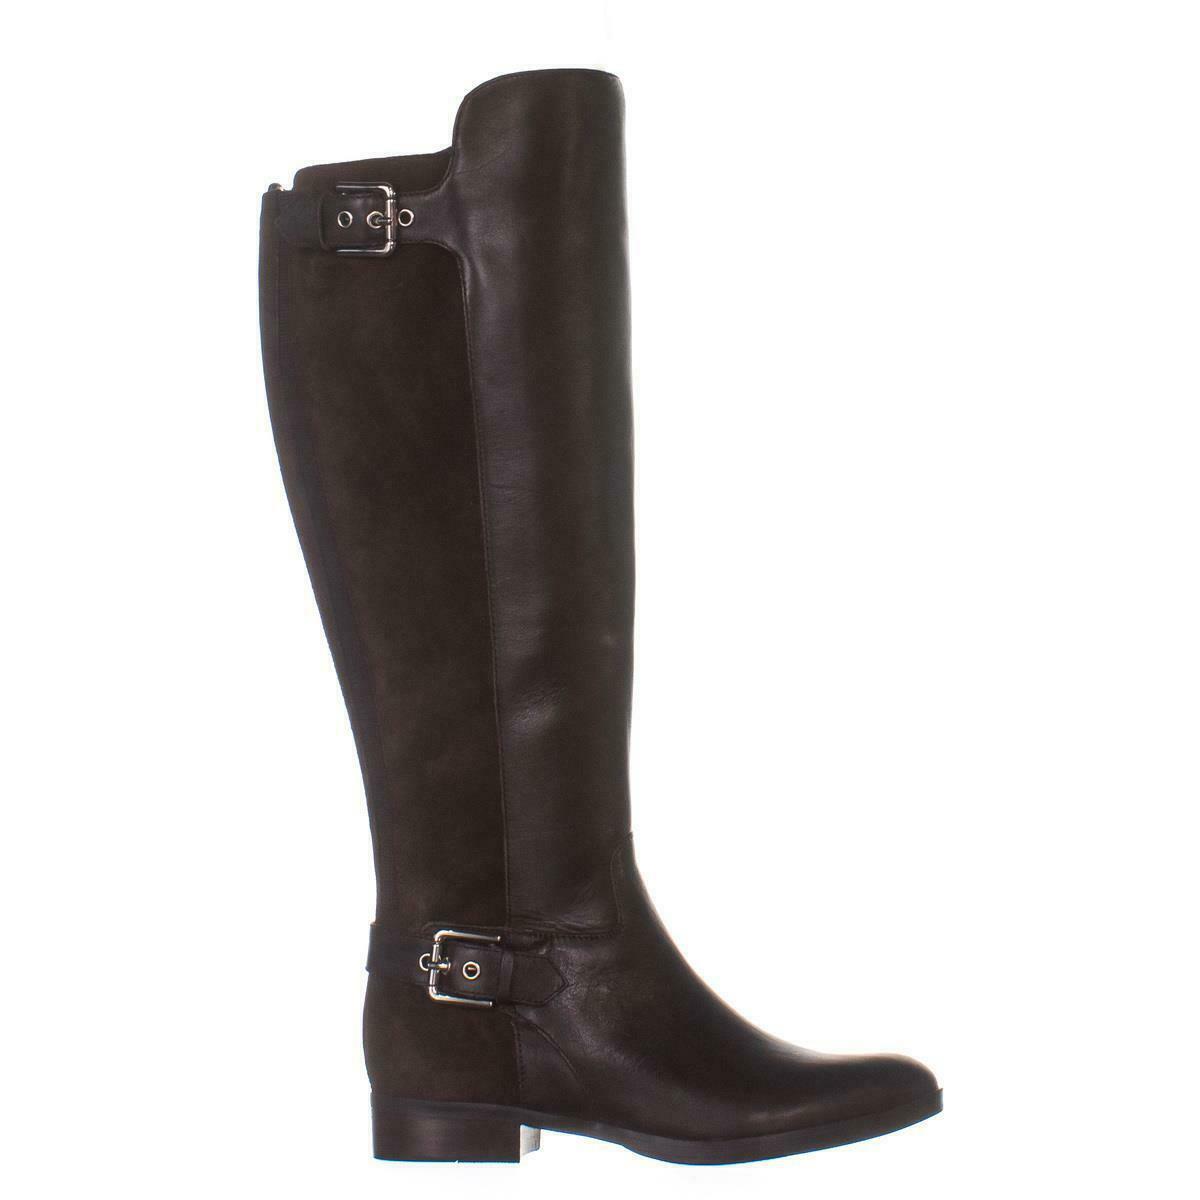 Marc Fisher Damsel Wide Calf Knee High Boots, Dark Brown Leather, 5 US ...